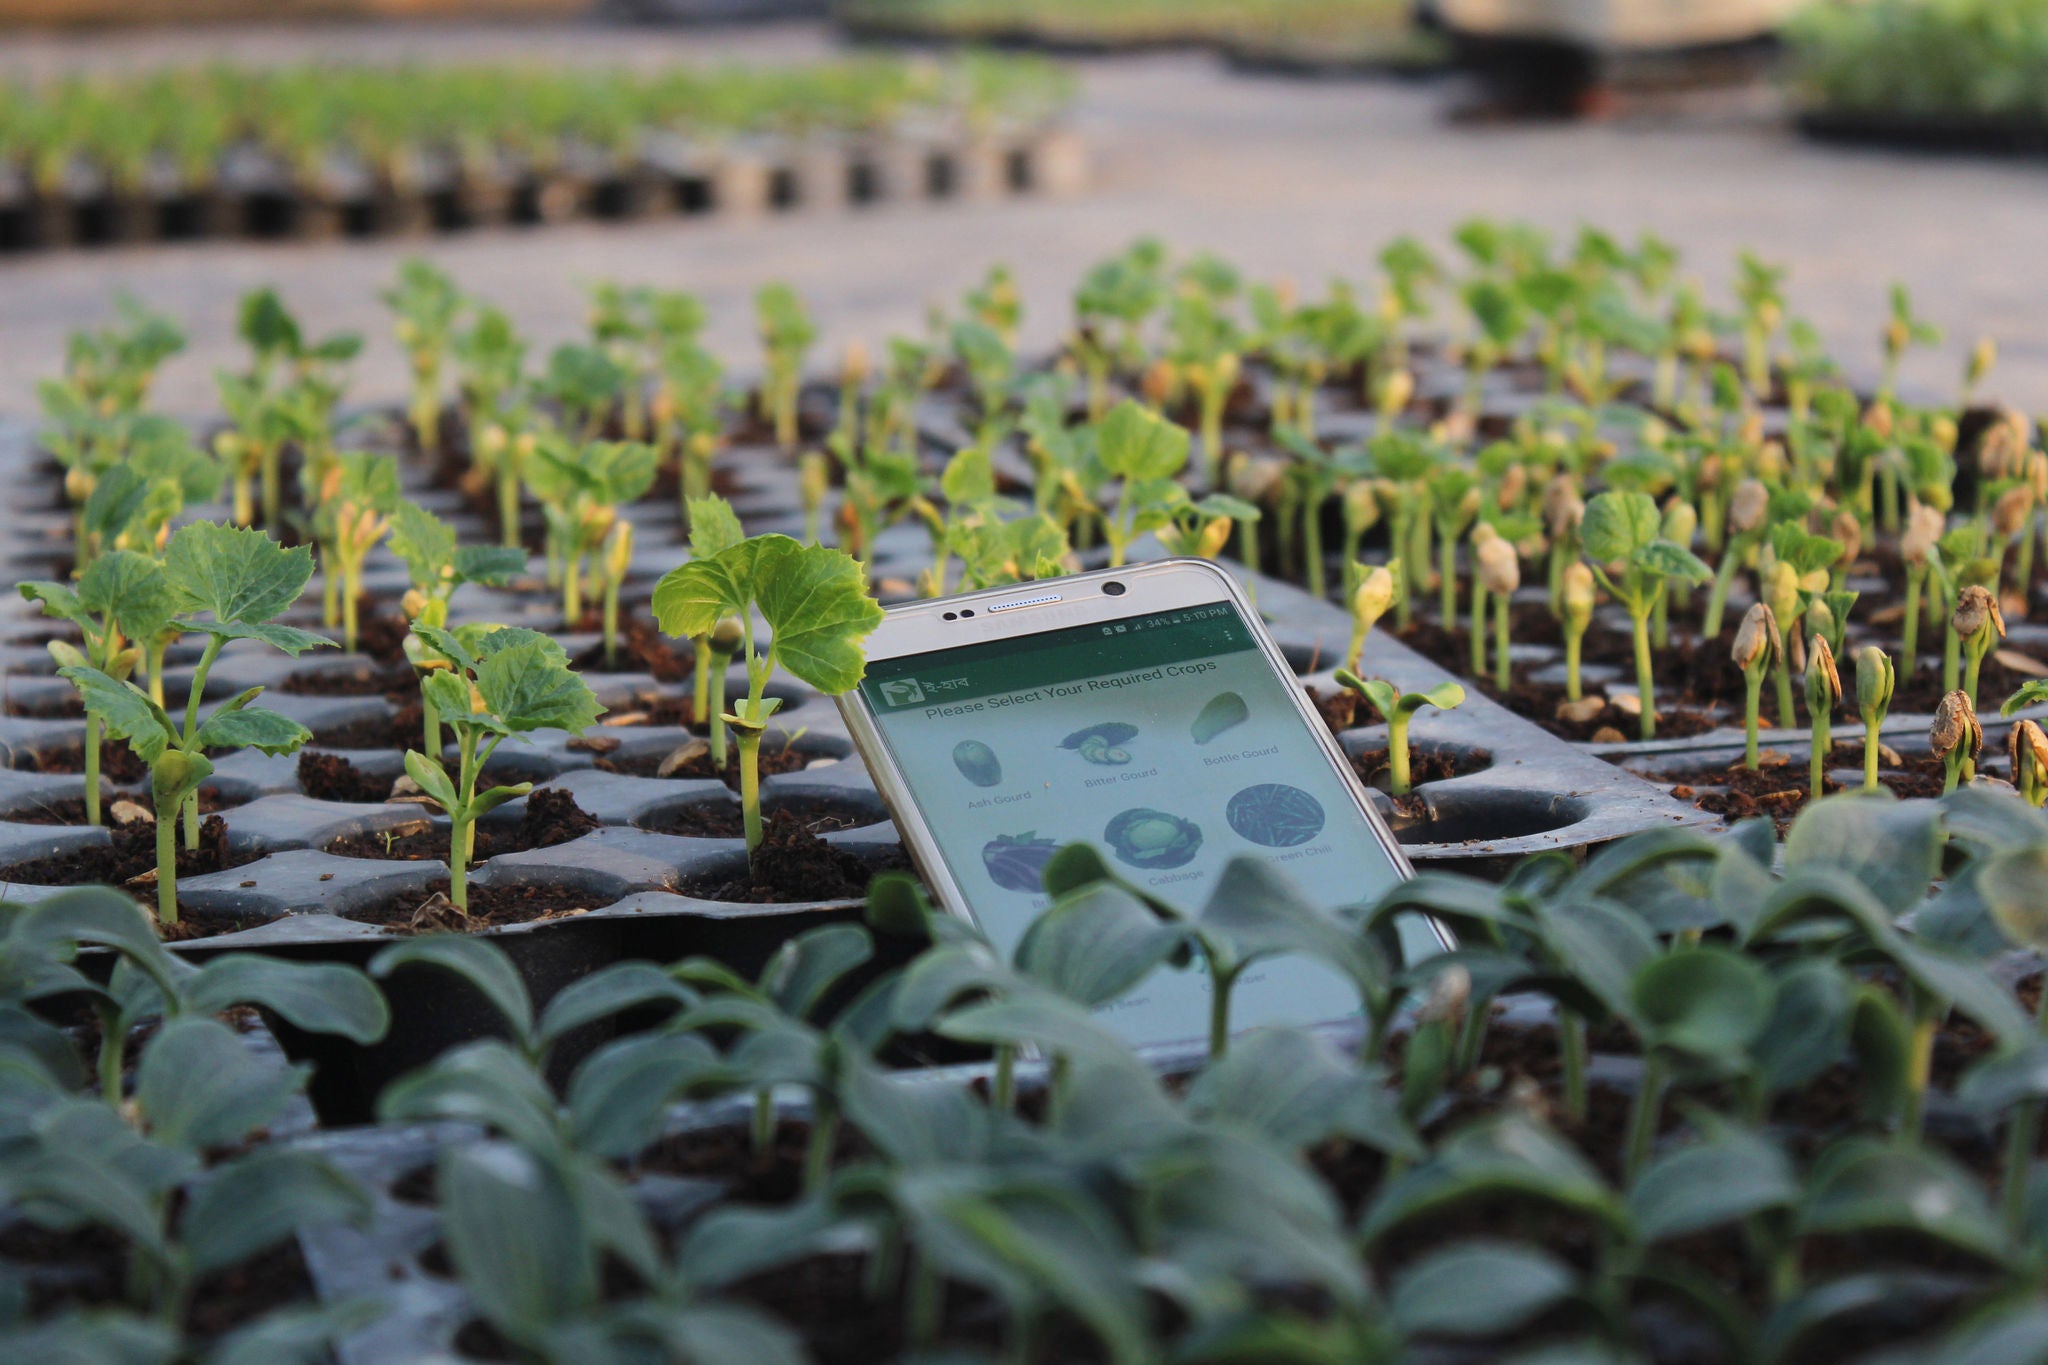 mobile phone by tray of seedlings